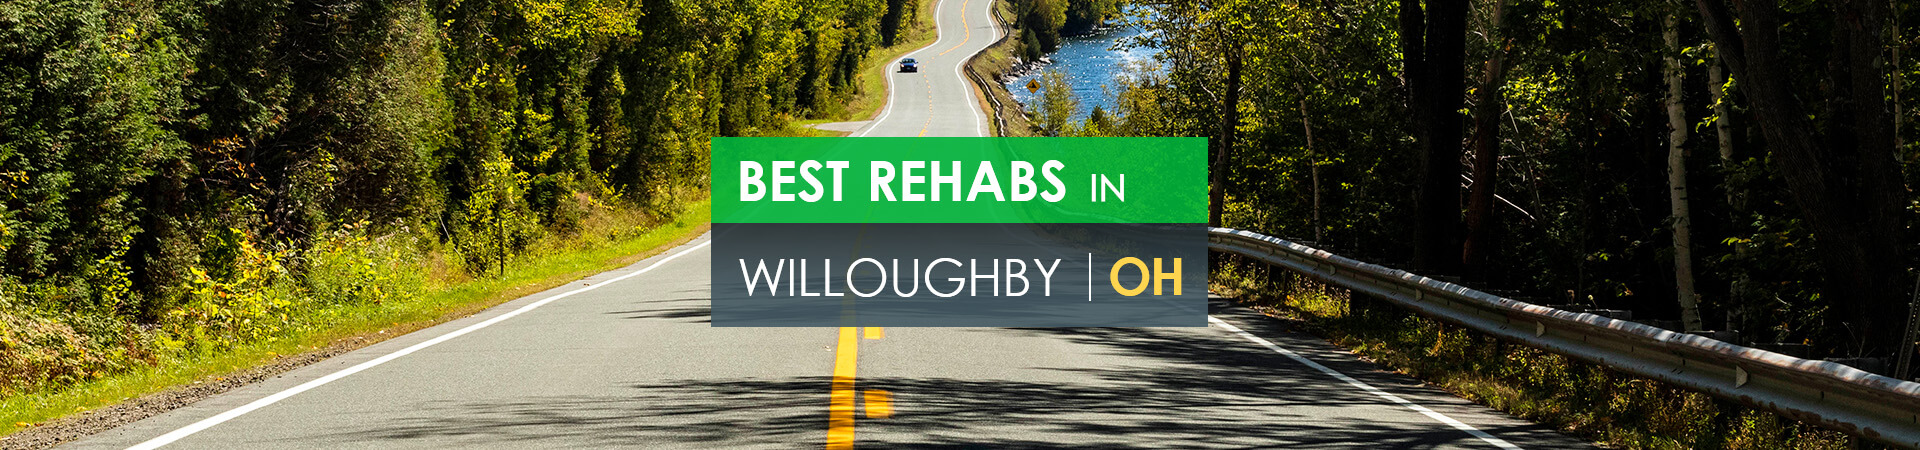 Best rehabs in Willoughby, OH